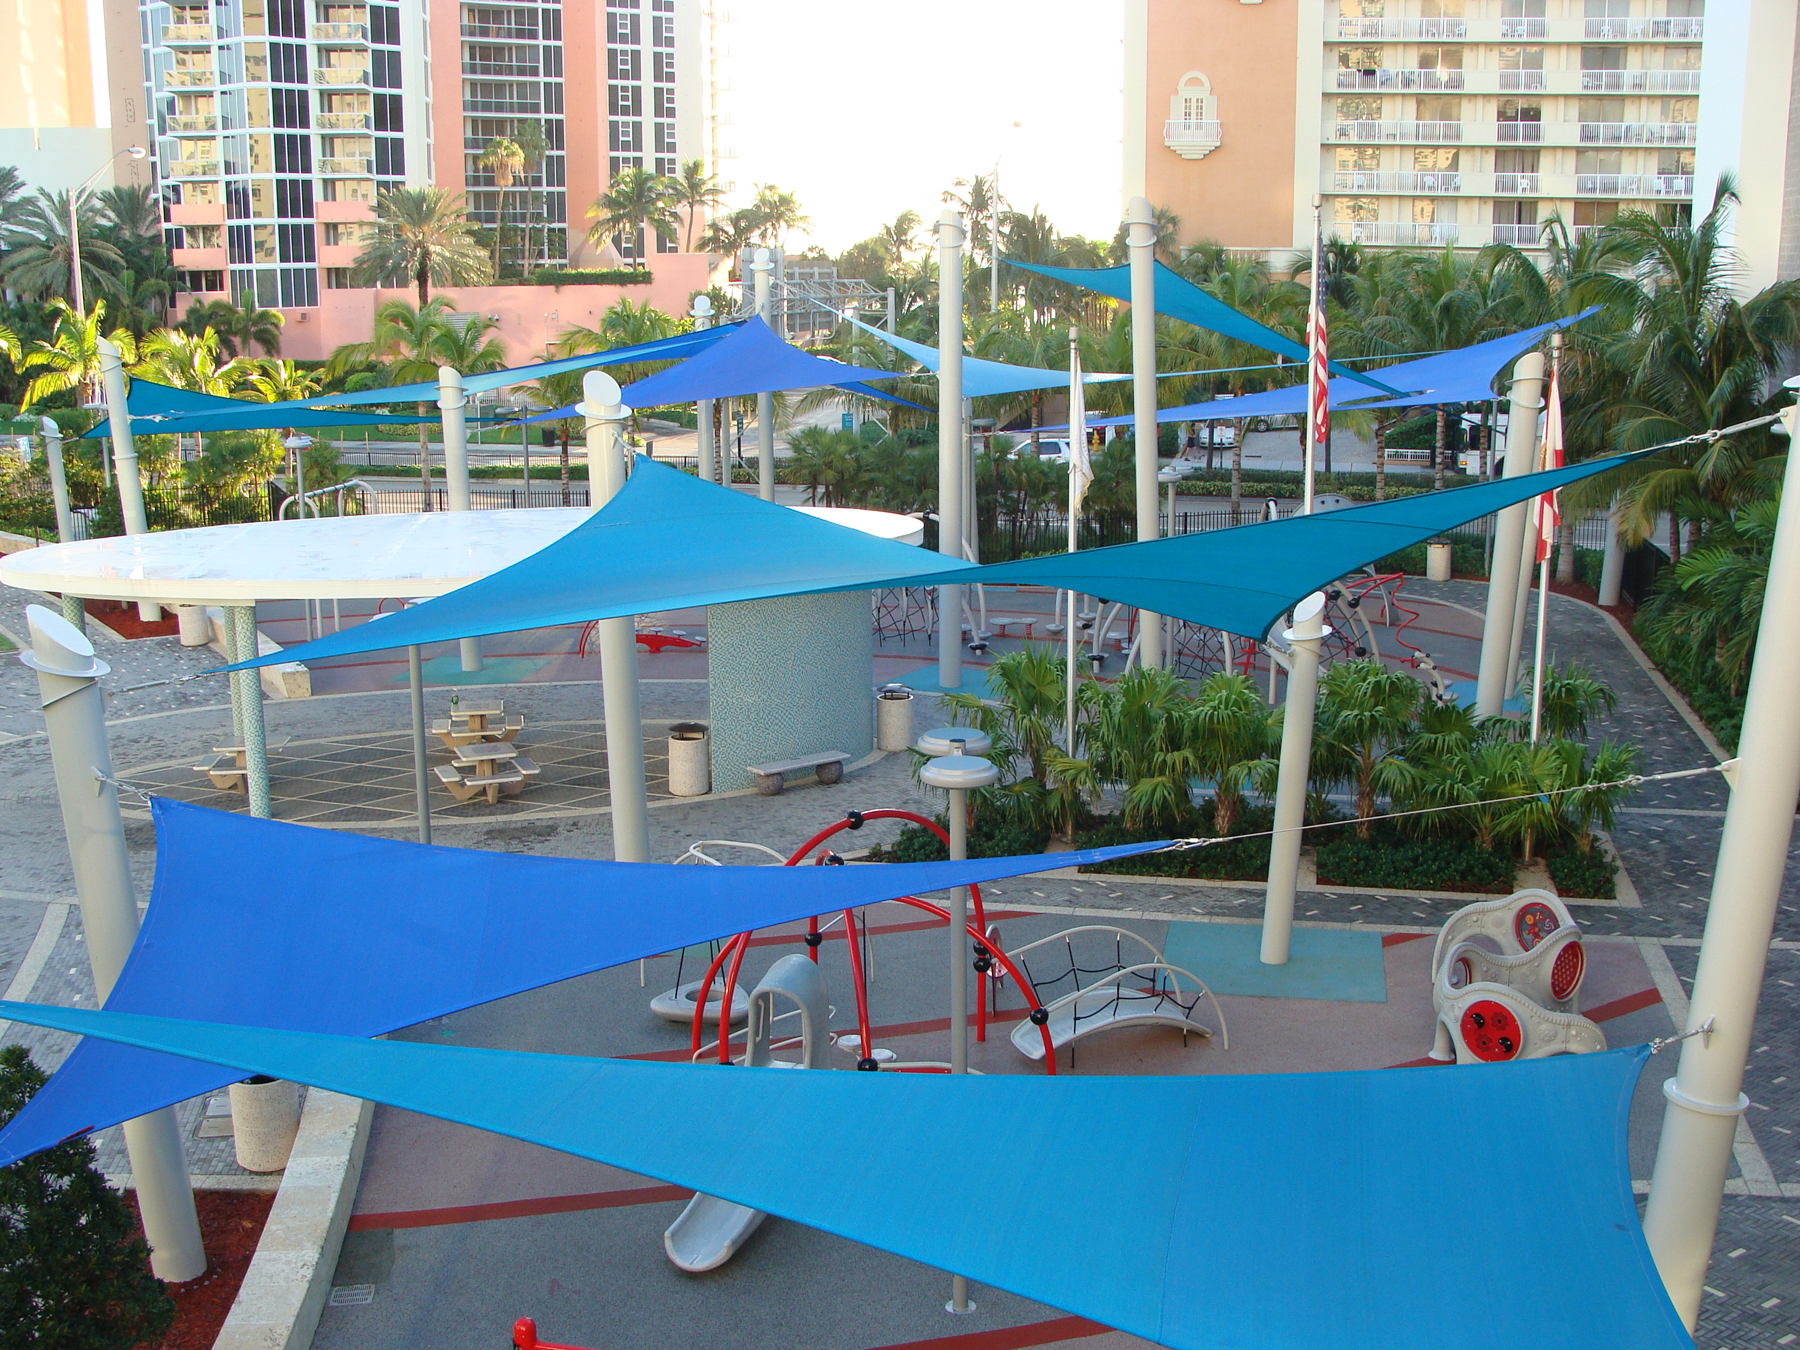 triangle shades covering outdoor playground